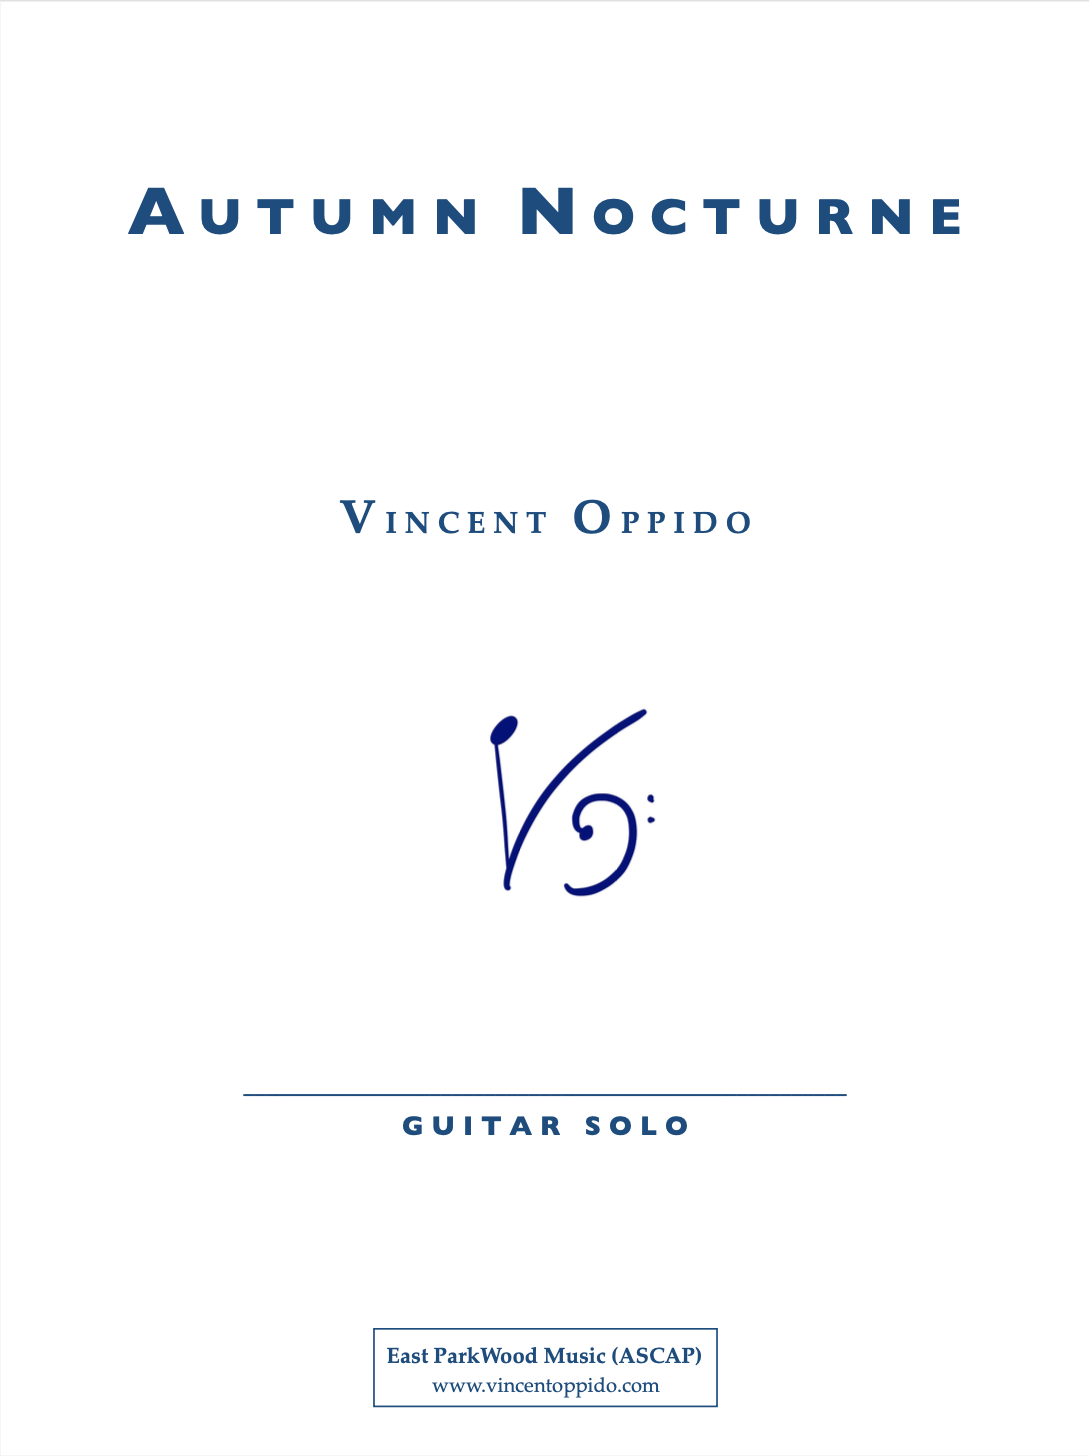 Autumn Nocturne by Vincent Oppido